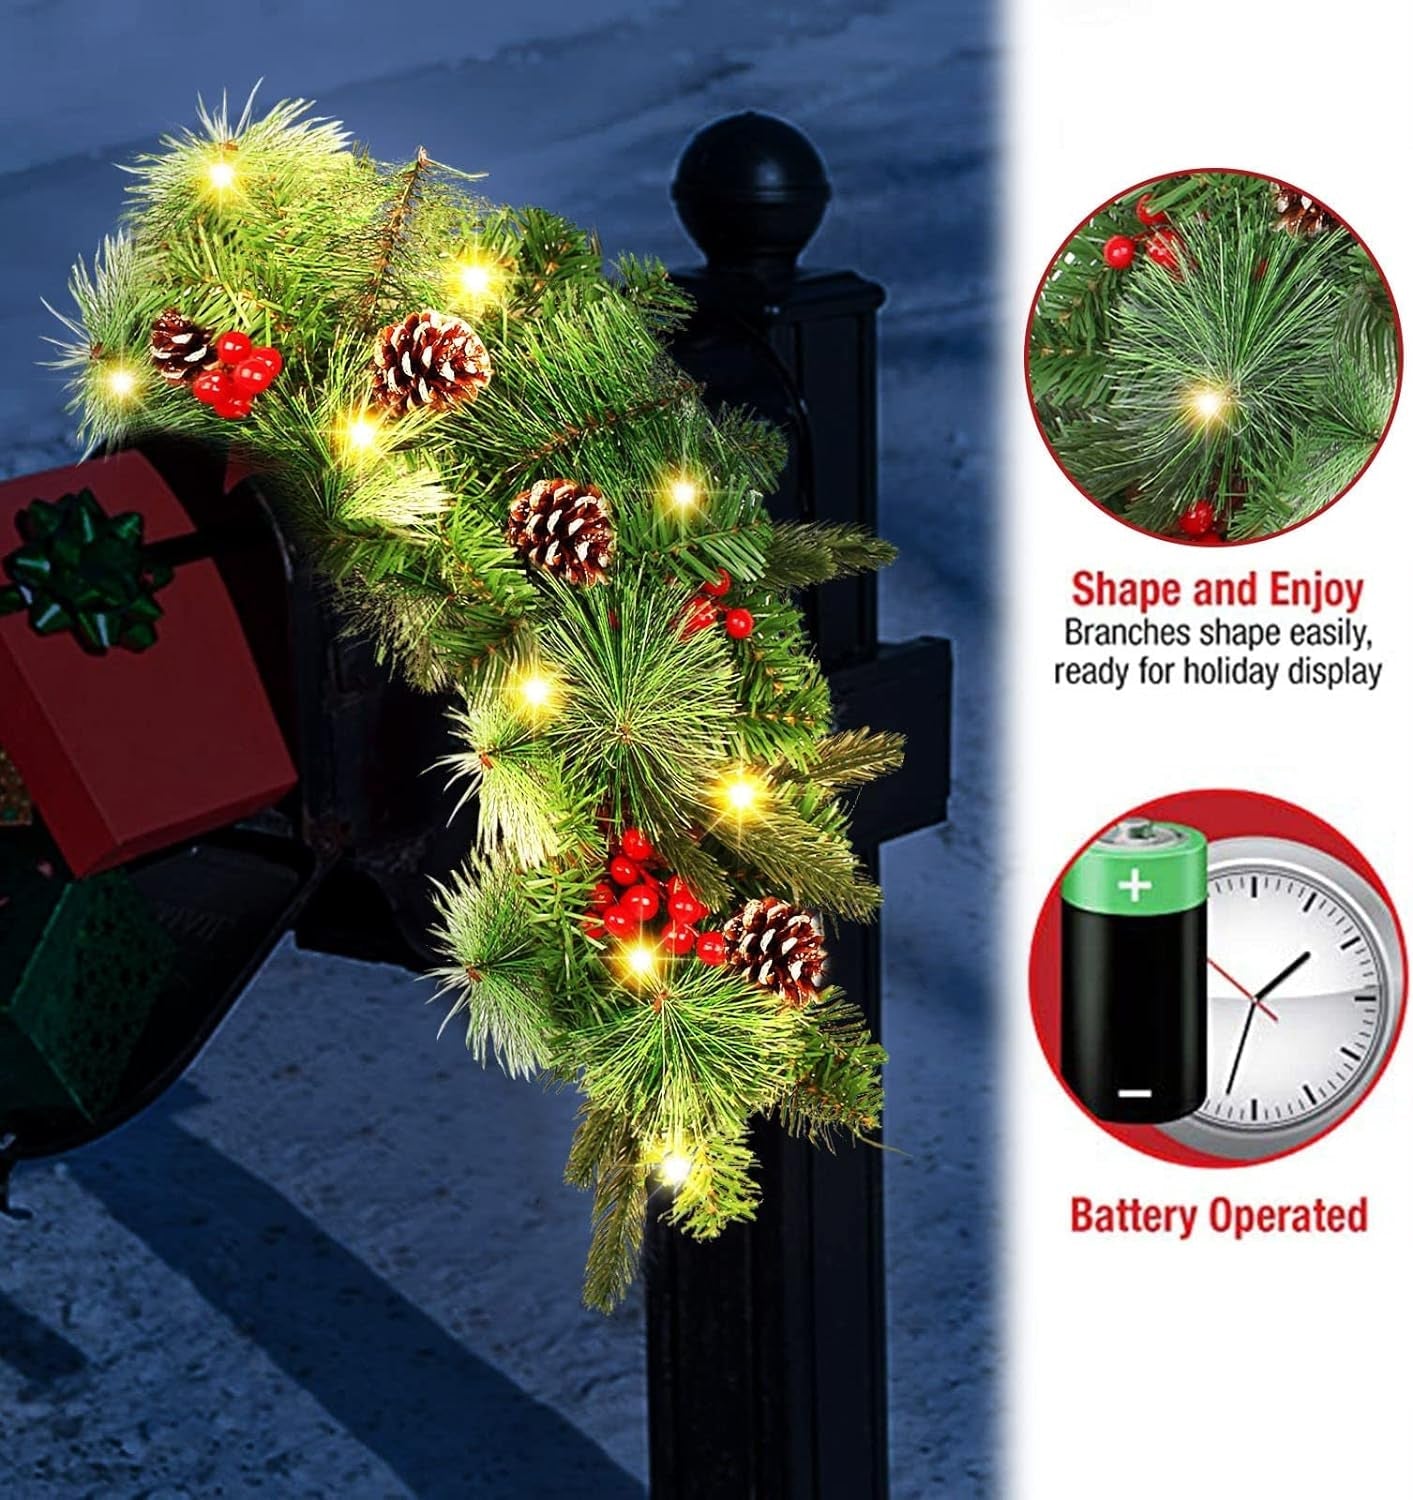 Mailbox Swag Christmas Decorations, 37 Inch Christmas Mailbox Swag with Lights Wintry Berries Xmas Mailbox Swag Garland Artificial Christmas Swag, Pine Cone and Red Berries Door Swag Home Decor